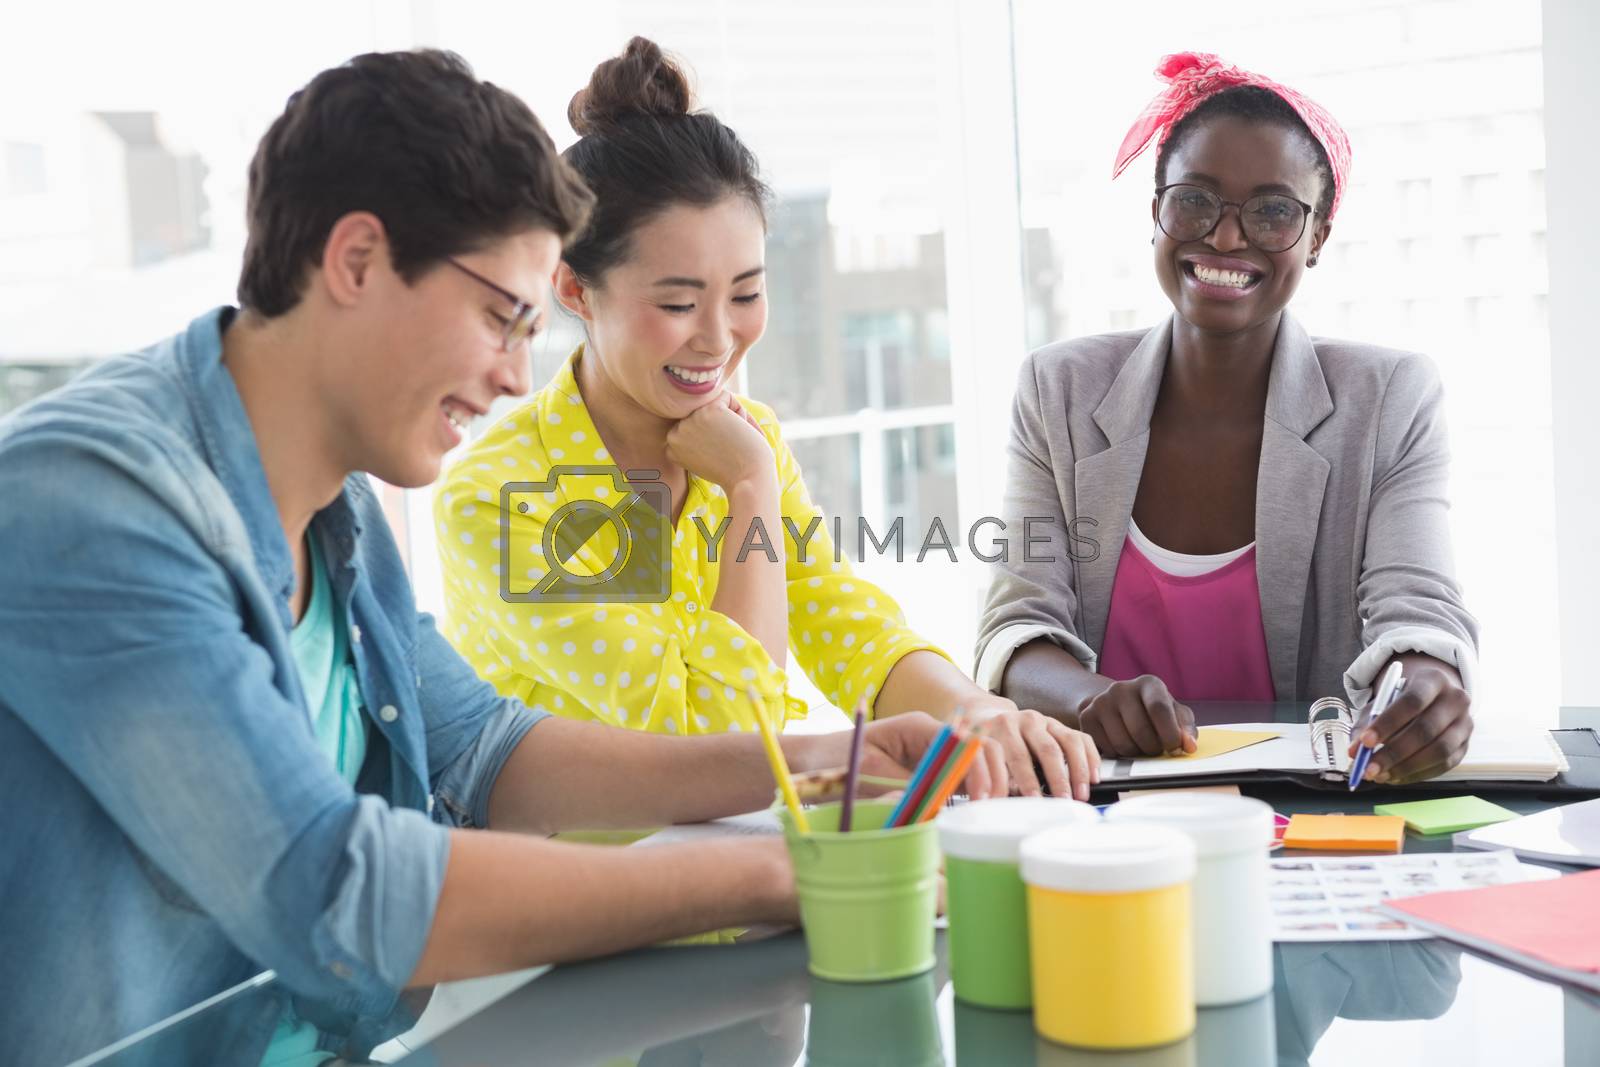 Royalty free image of Young creative team having a meeting by Wavebreakmedia